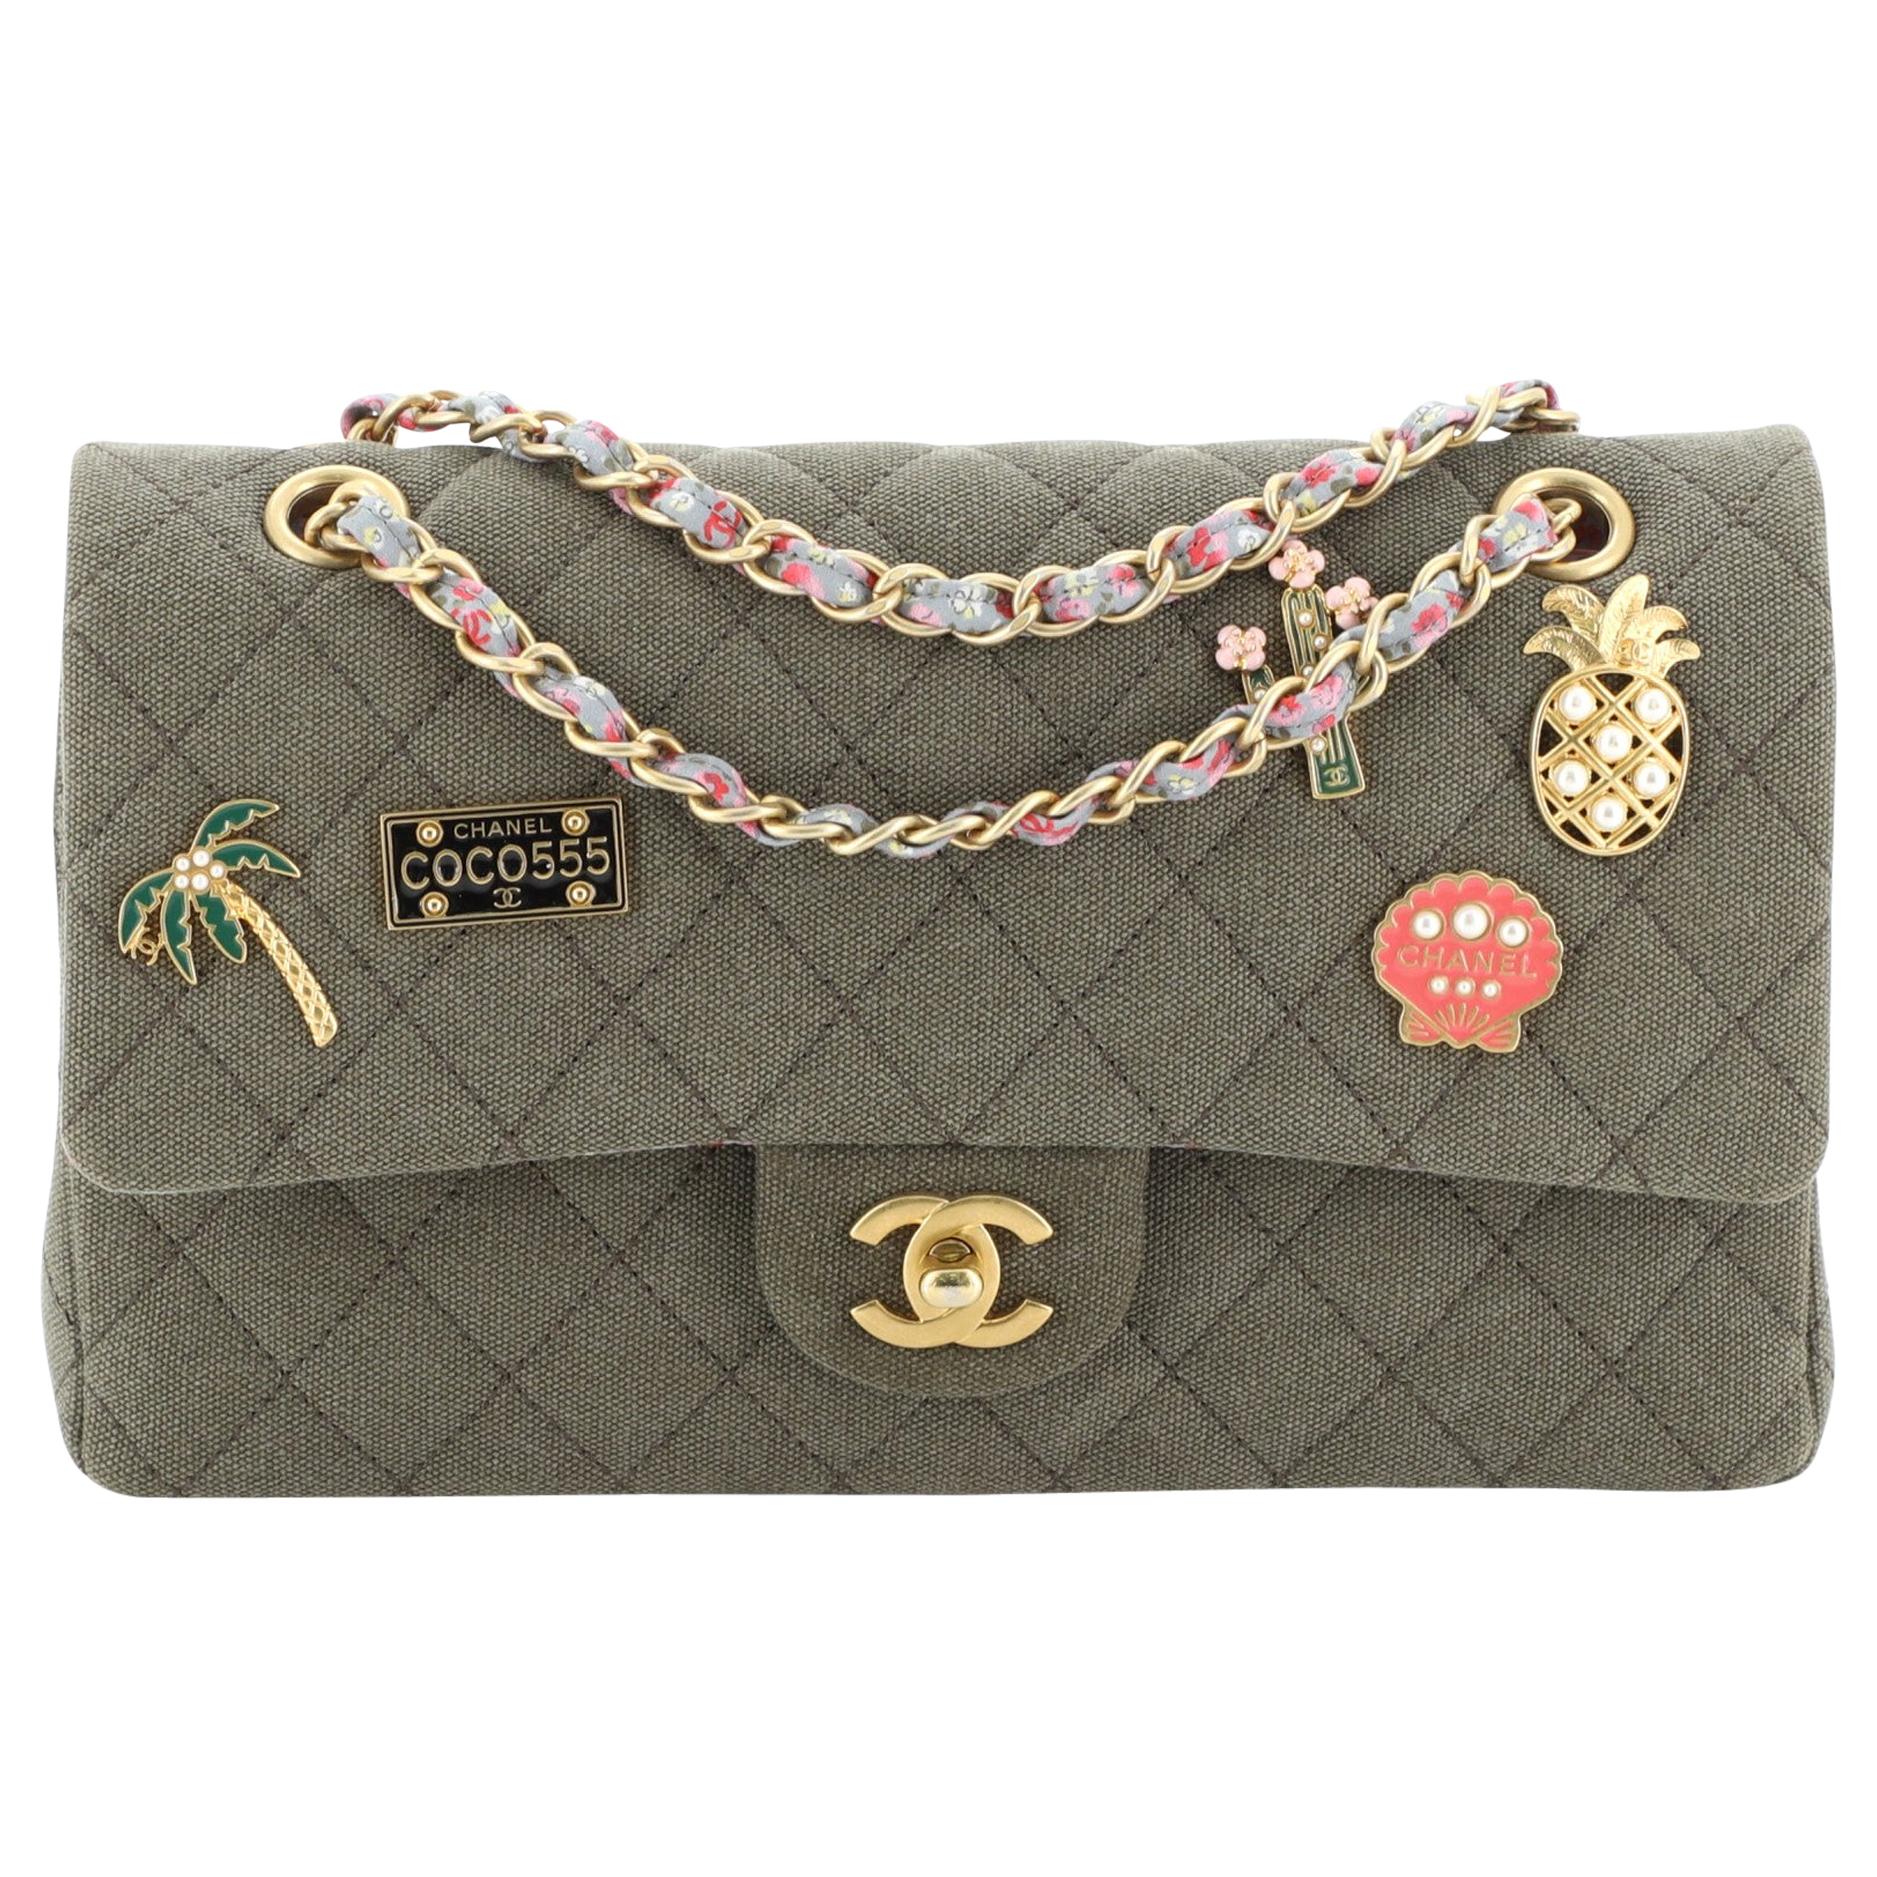 Chanel Cuba Charms Classic Double Flap Bag Quilted Canvas Mediu